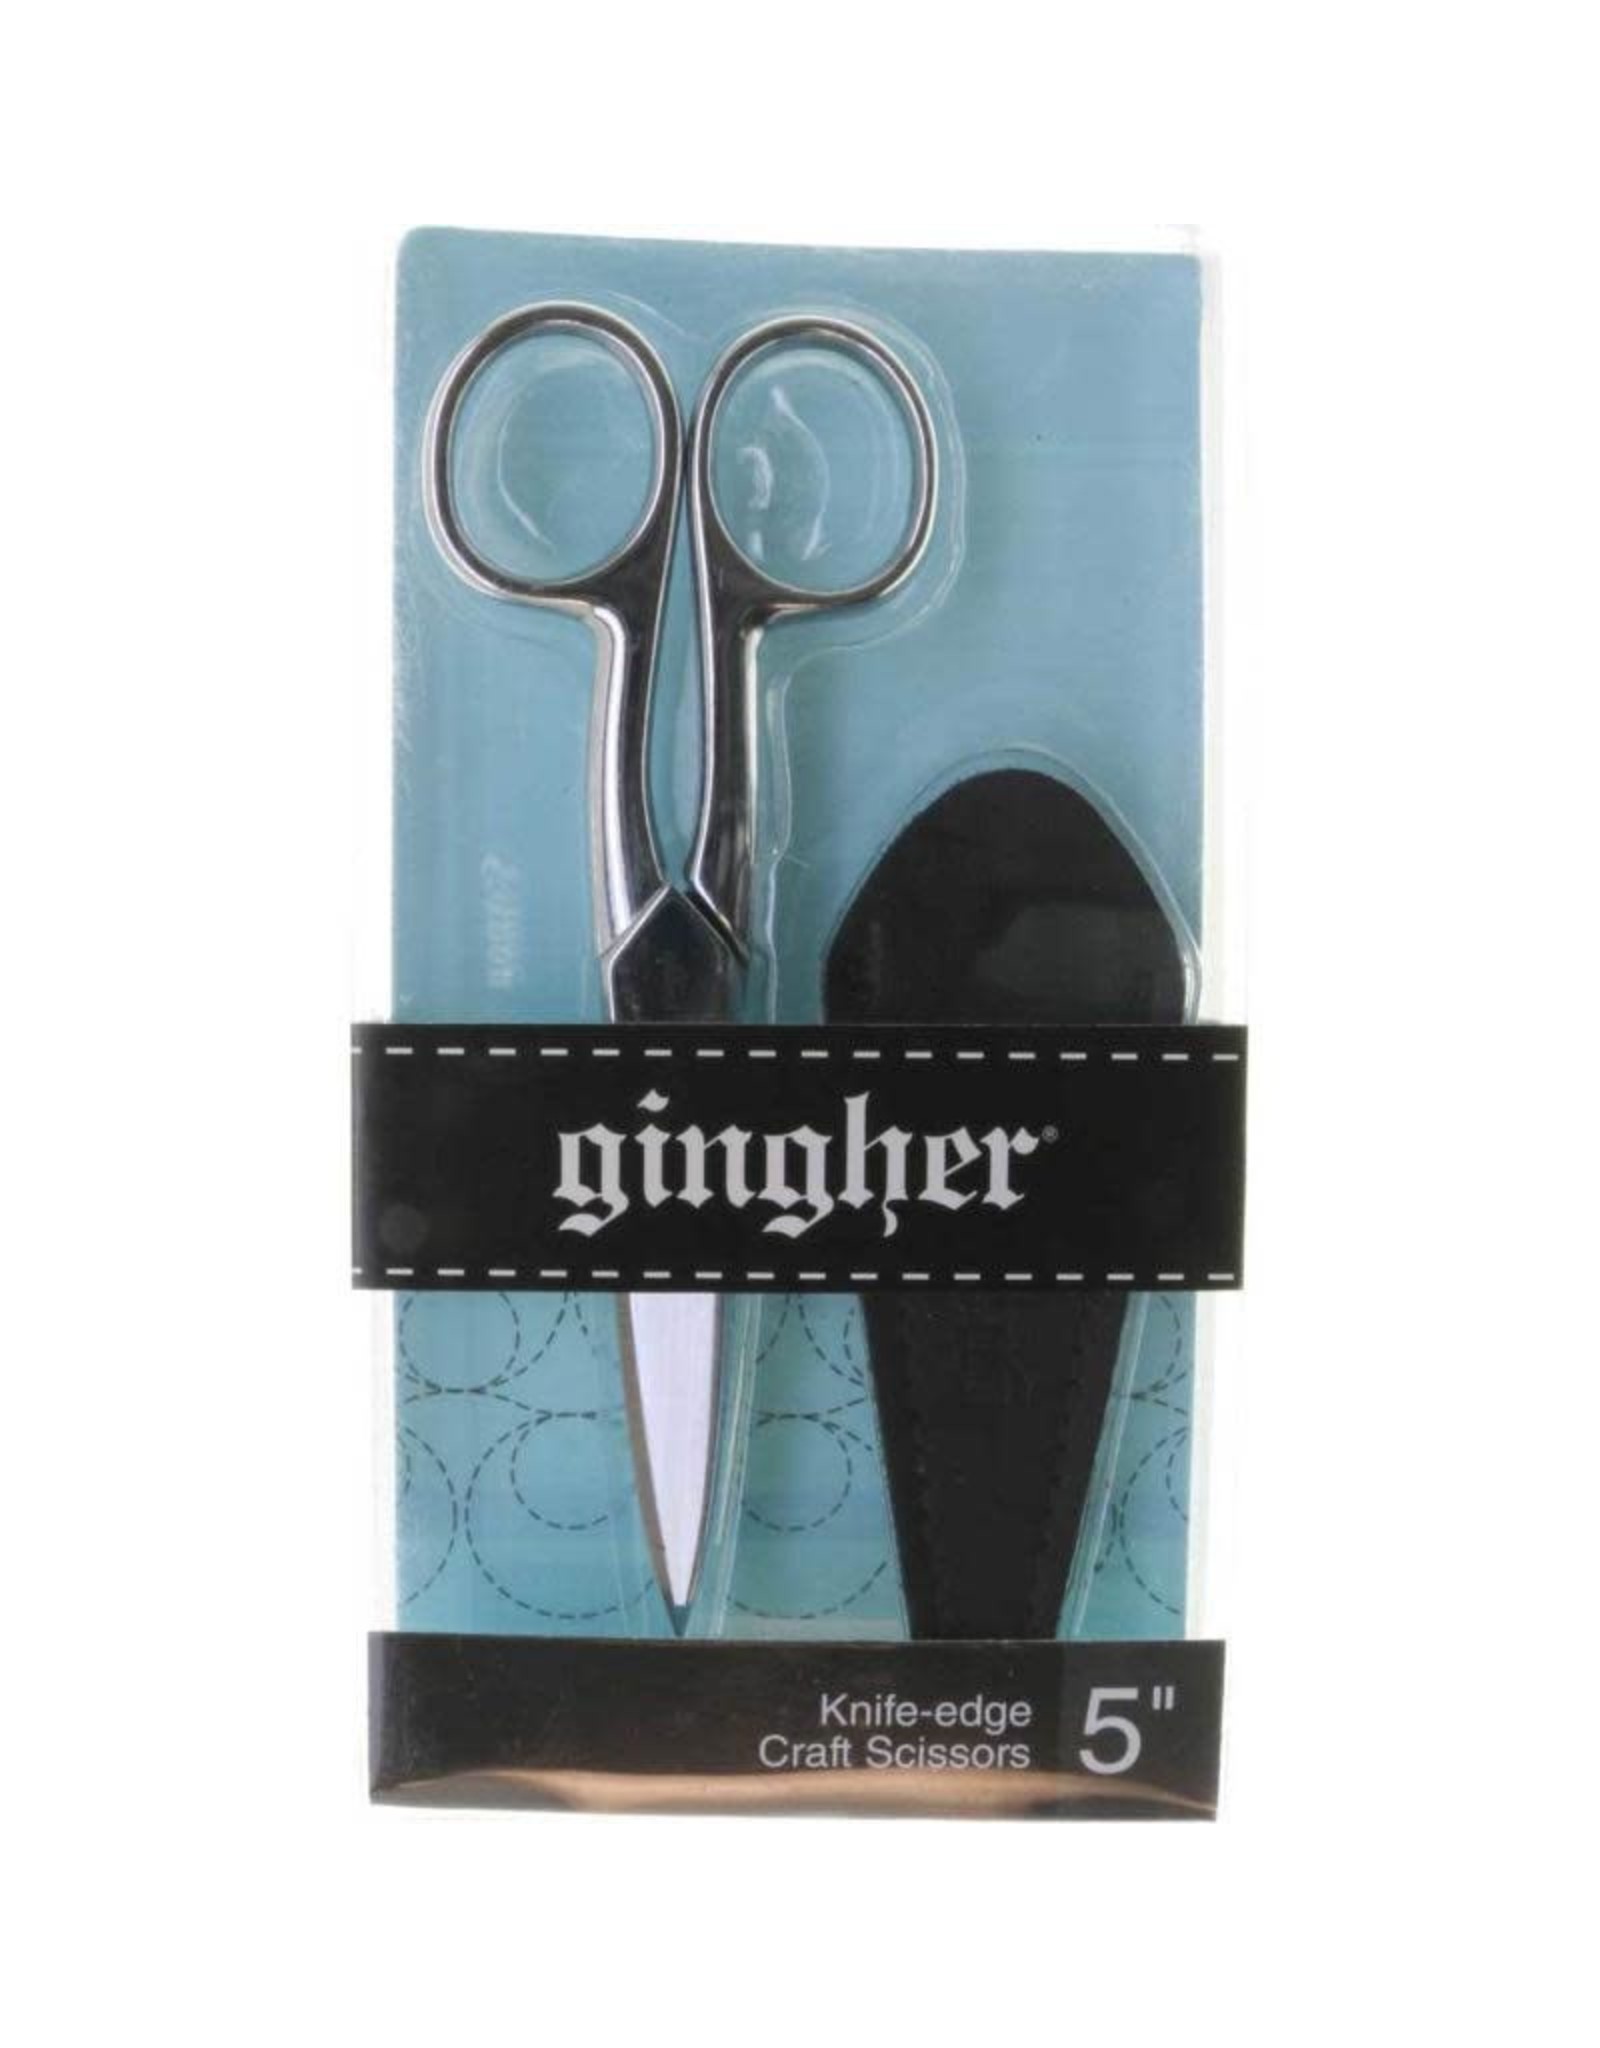 Gingher Gingher 5" Knife-edge Craft Scissors